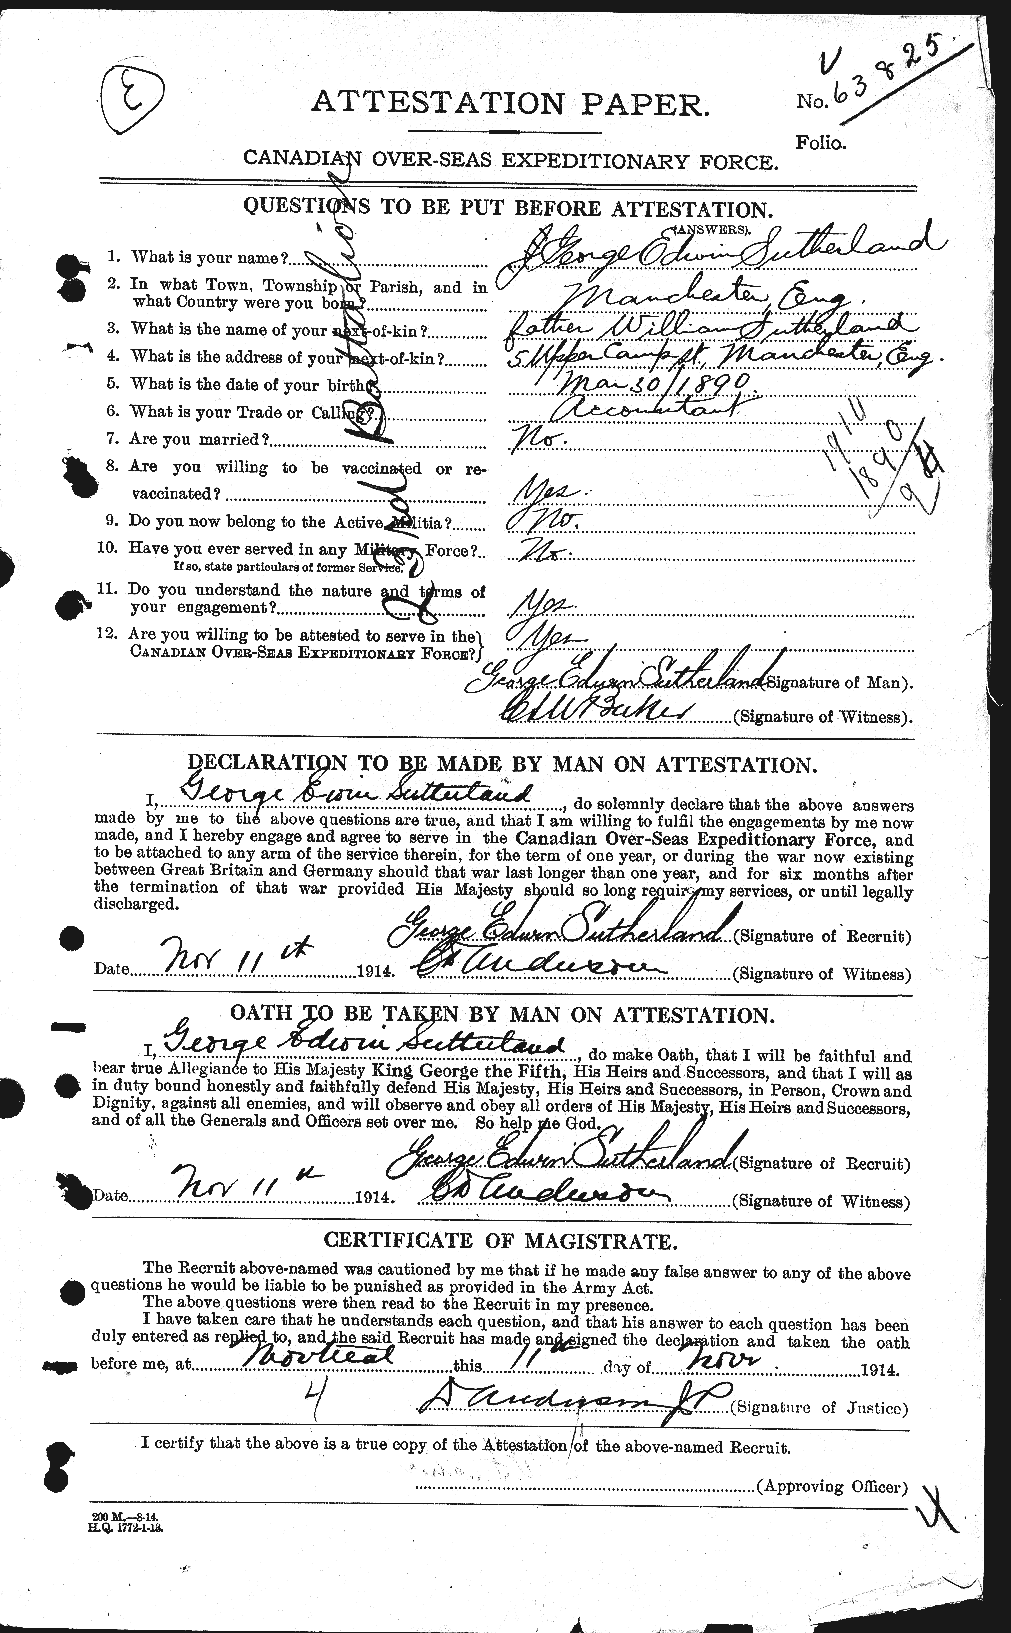 Personnel Records of the First World War - CEF 124848a